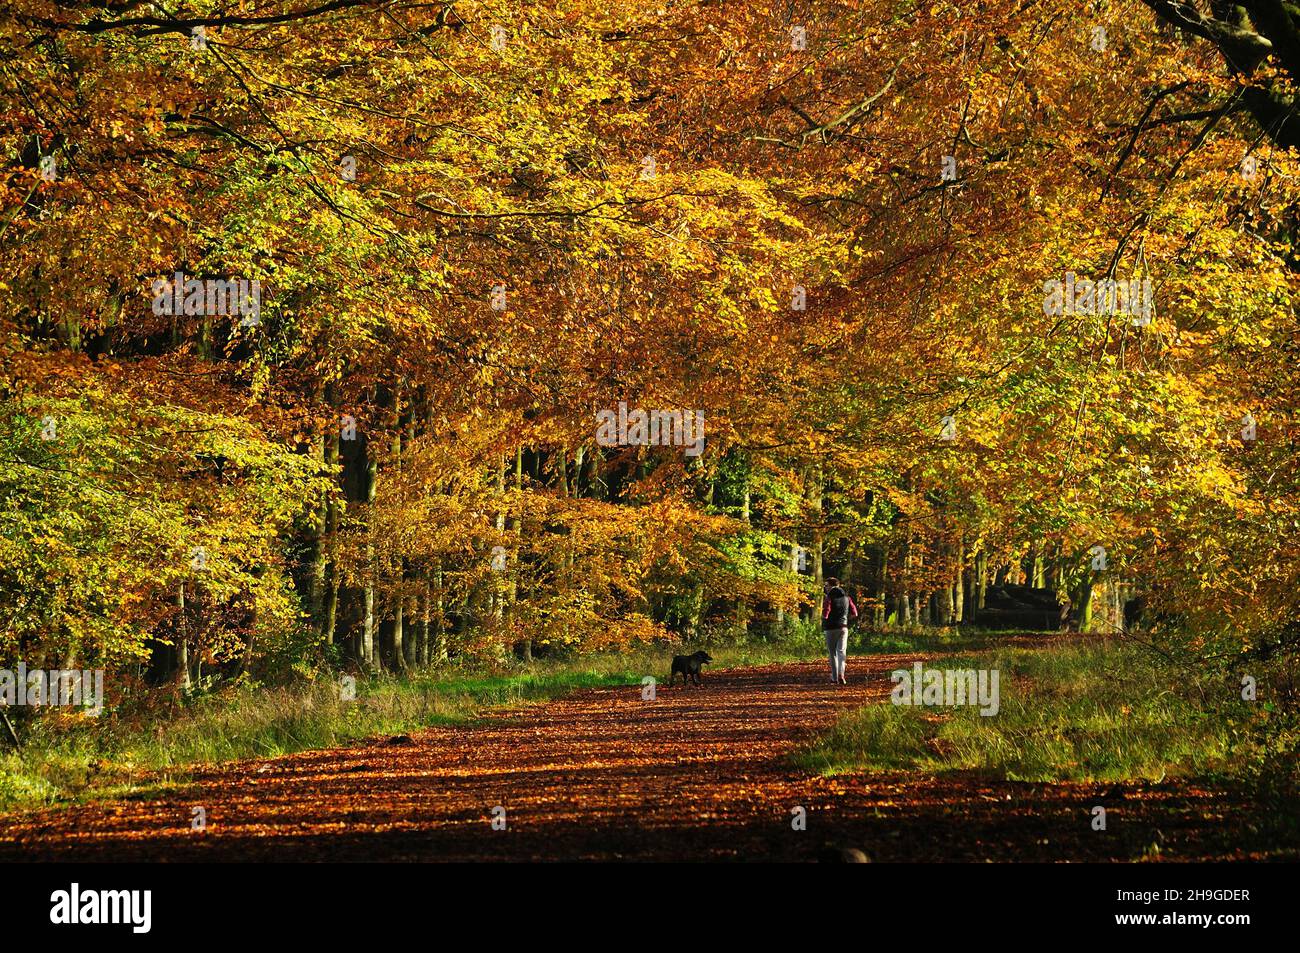 Grovely Wood, Wiltshire in autumn Stock Photo